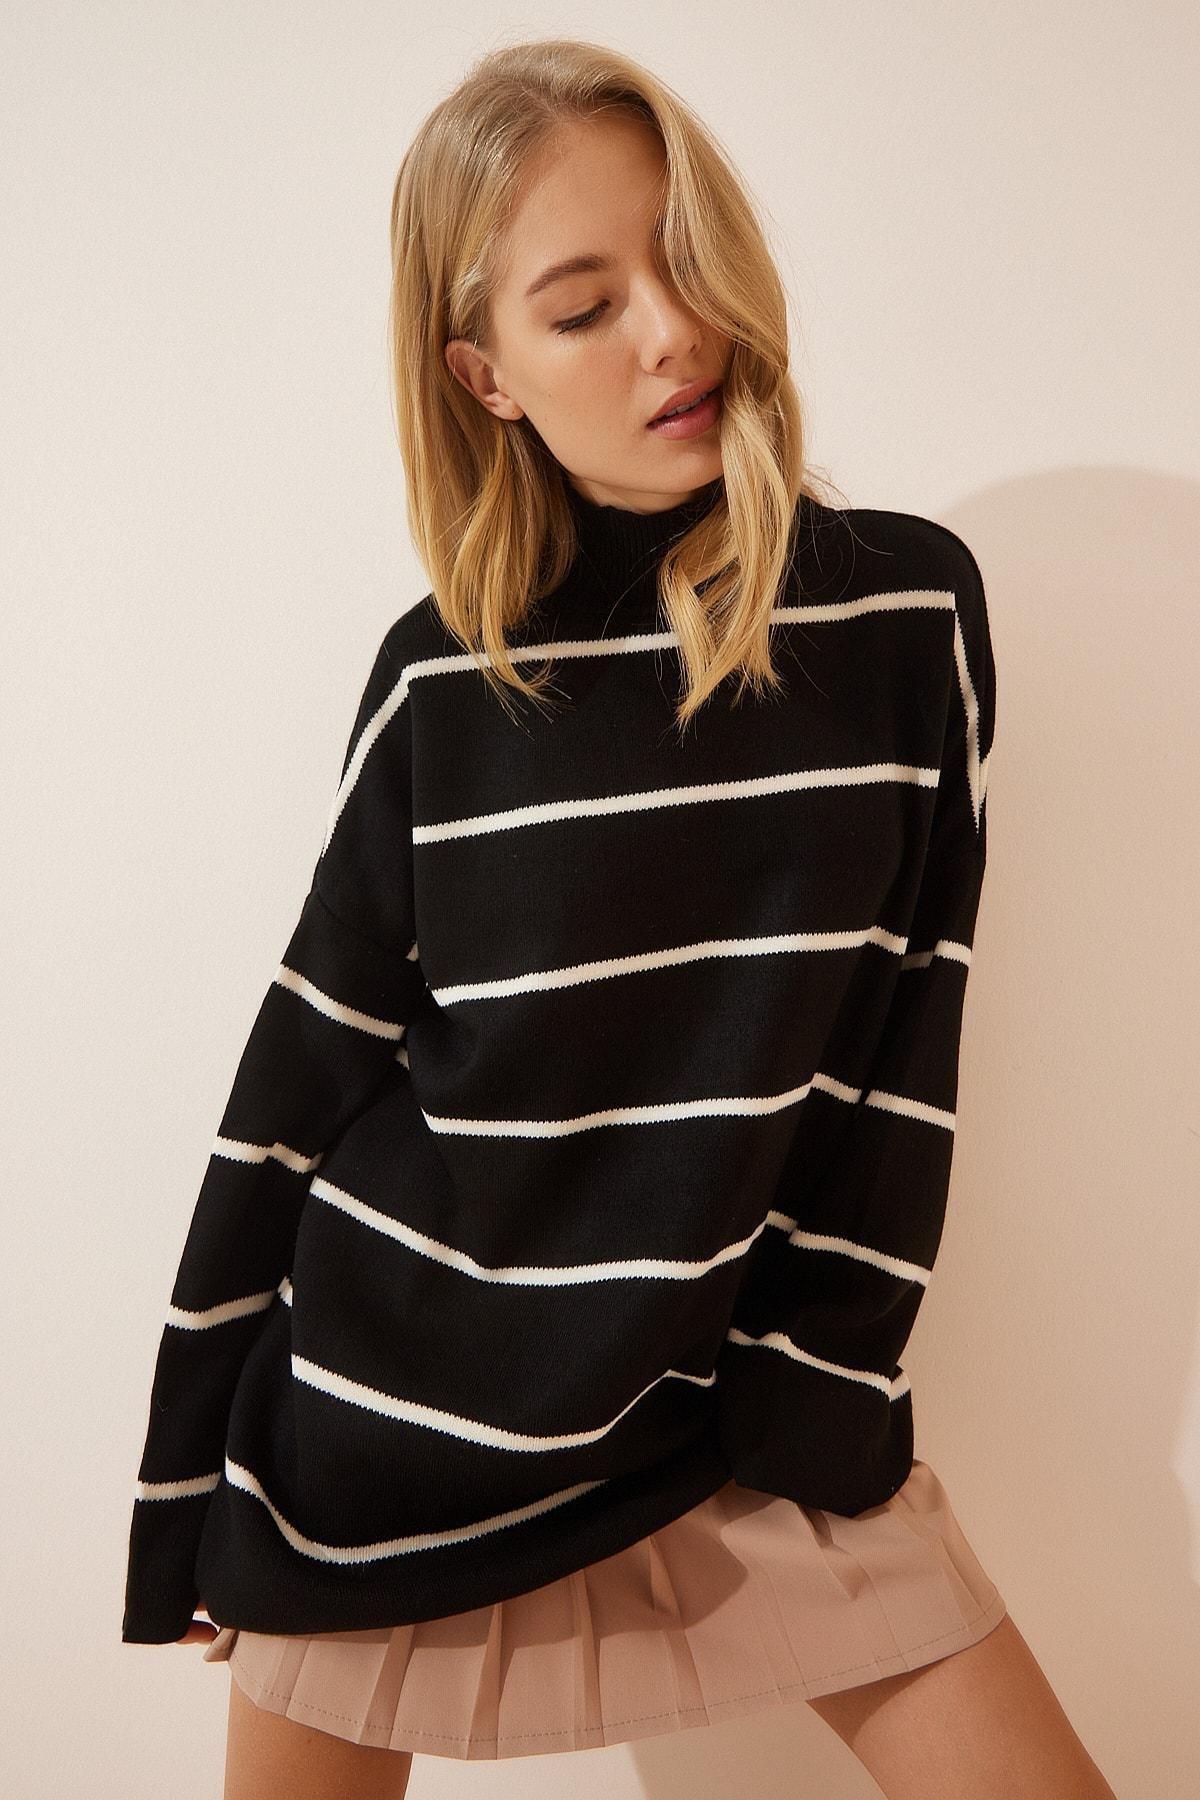 Happiness Istanbul - Black Striped Oversize Sweater